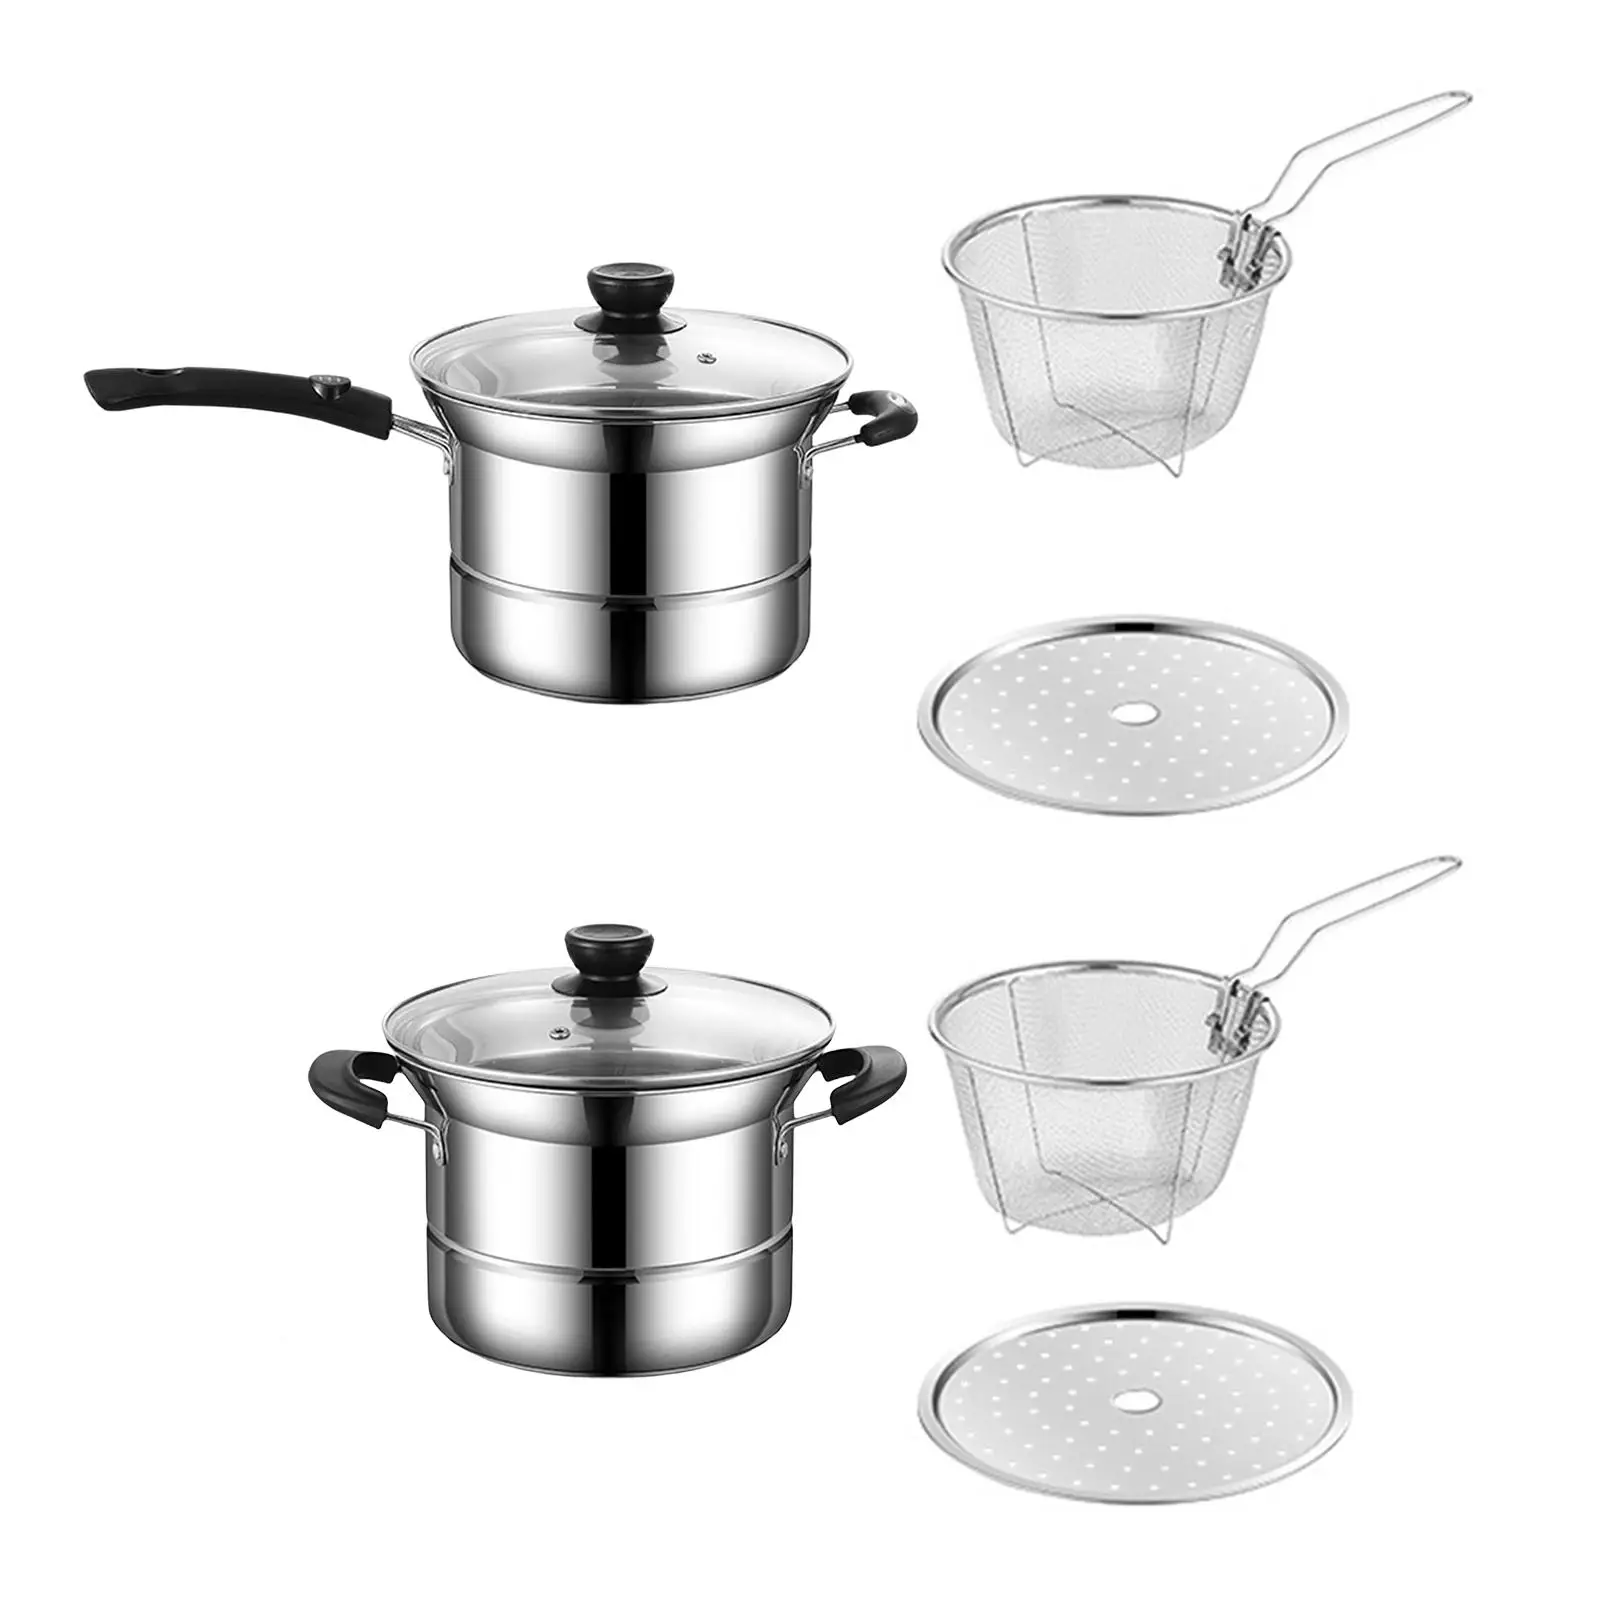 Stainless Steel Saucepan Utensils Milk Pot Kitchenware Universal Multipurpose Small Pot for Home Cooking Restaurant Picnic Party